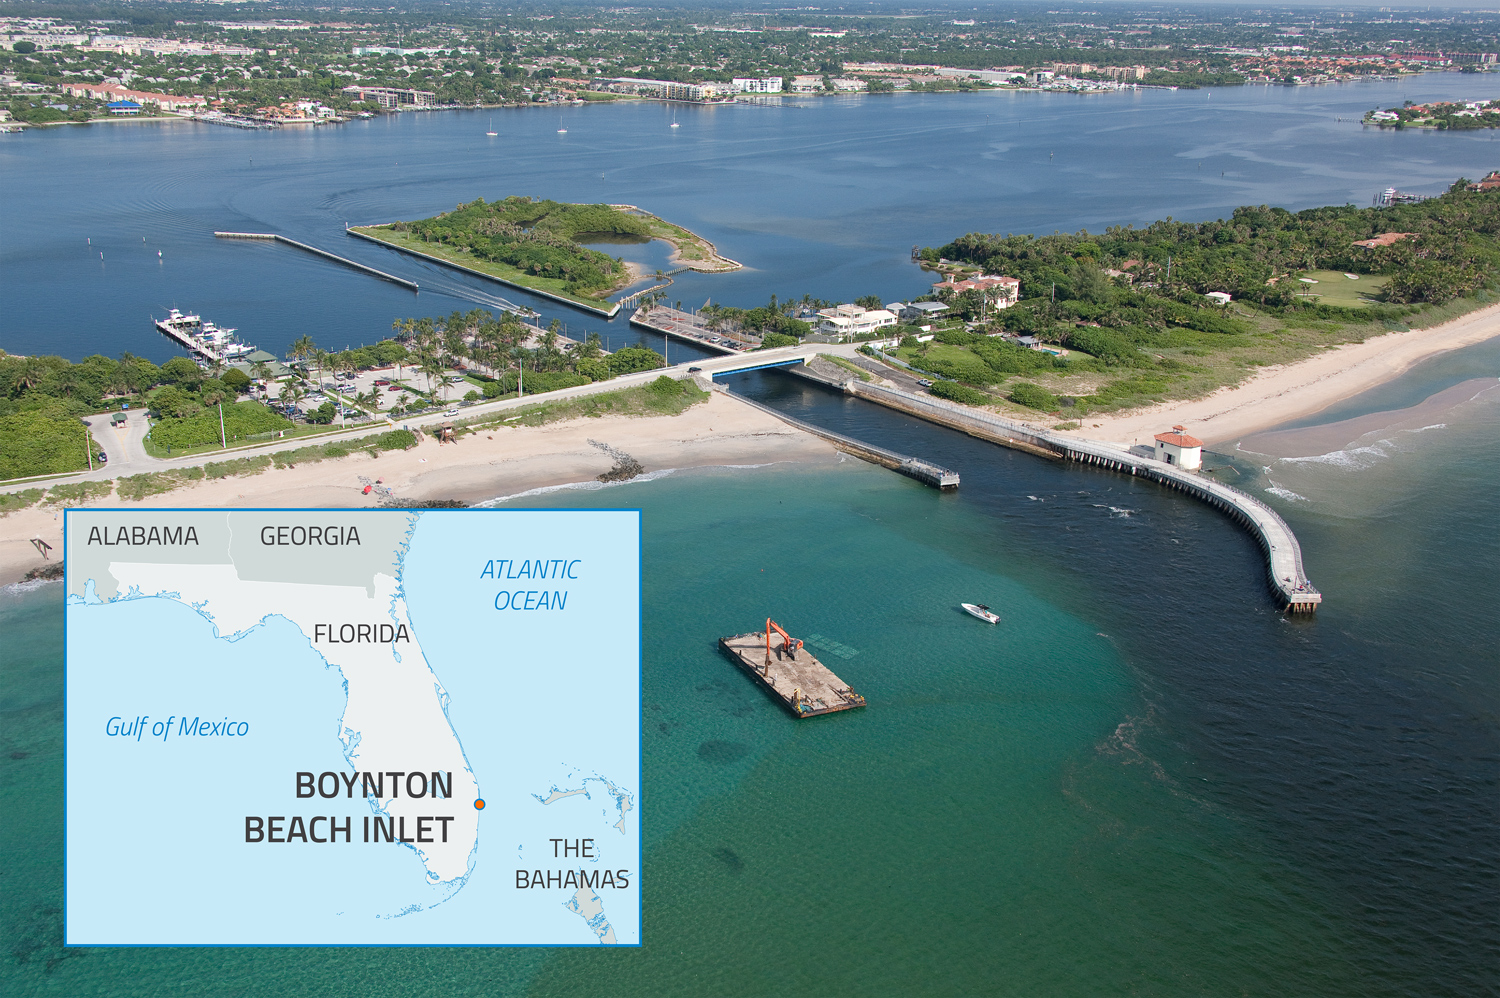 Aerial view of Boynton Beach Inlet with an inset map showing the inlet’s location in Florida